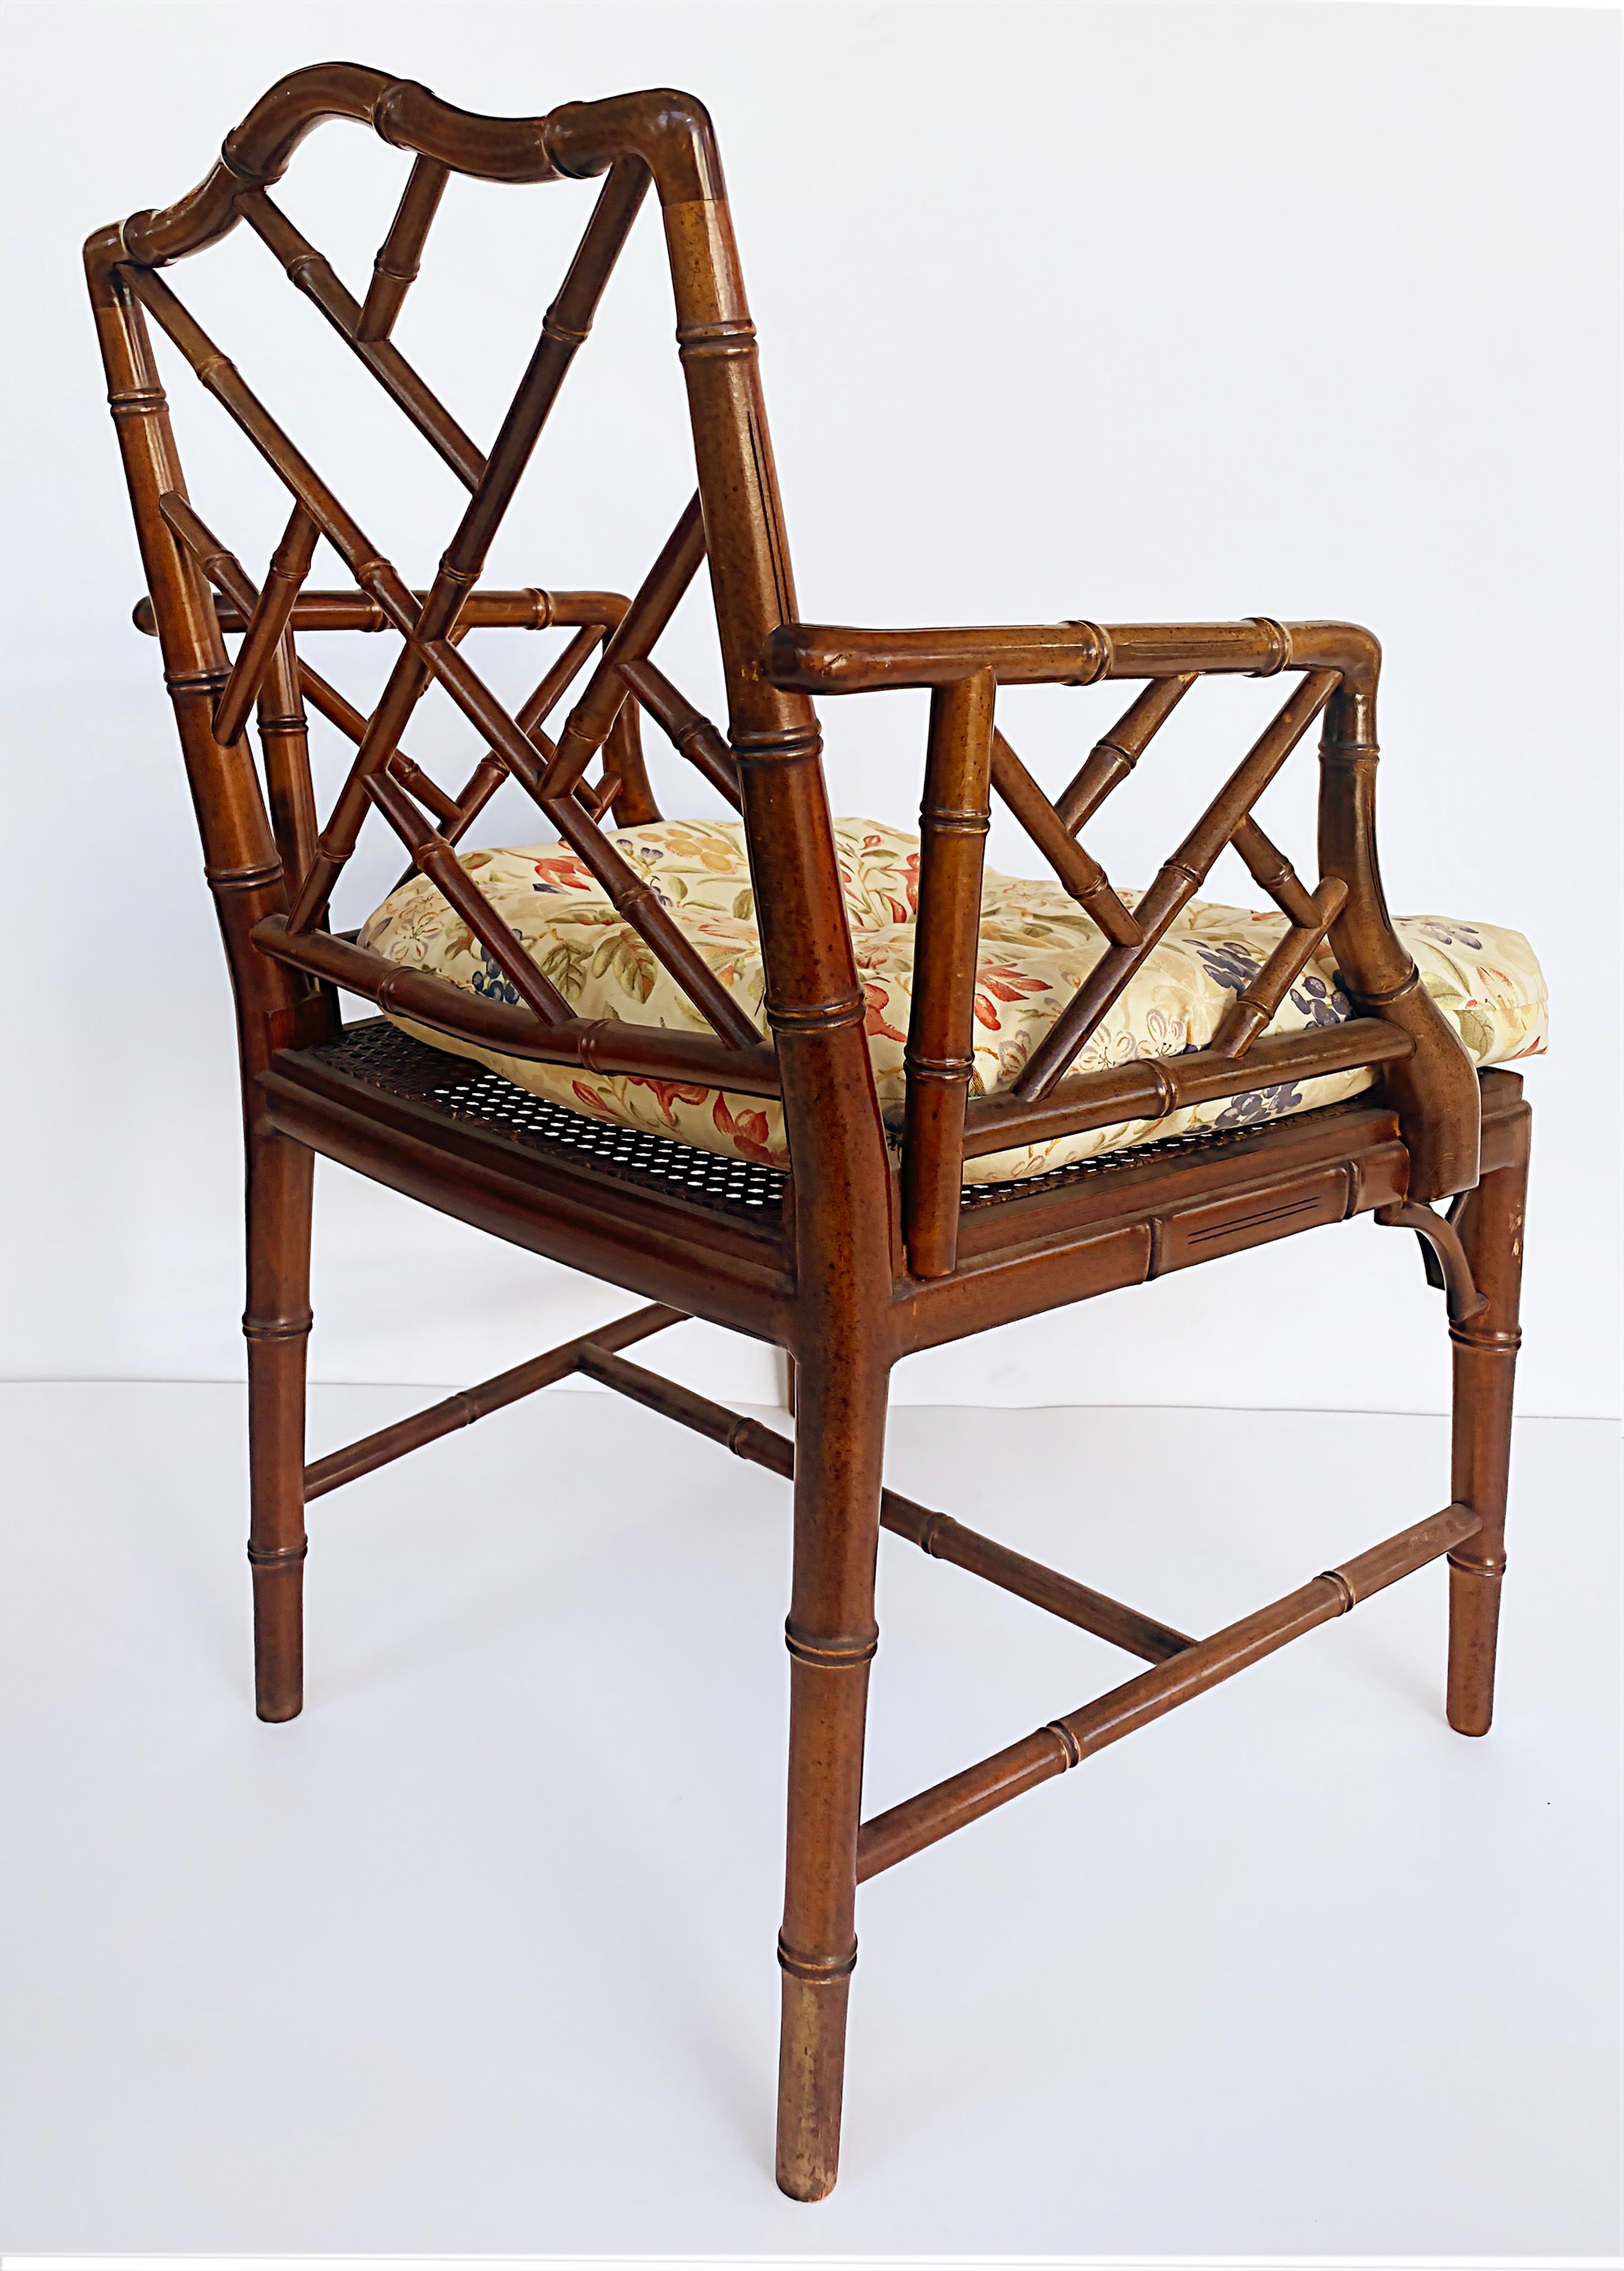 20th Century Chinese Chippendale Style Faux Bamboo Armchair, Caned Seat, Loose Seat Cushion For Sale